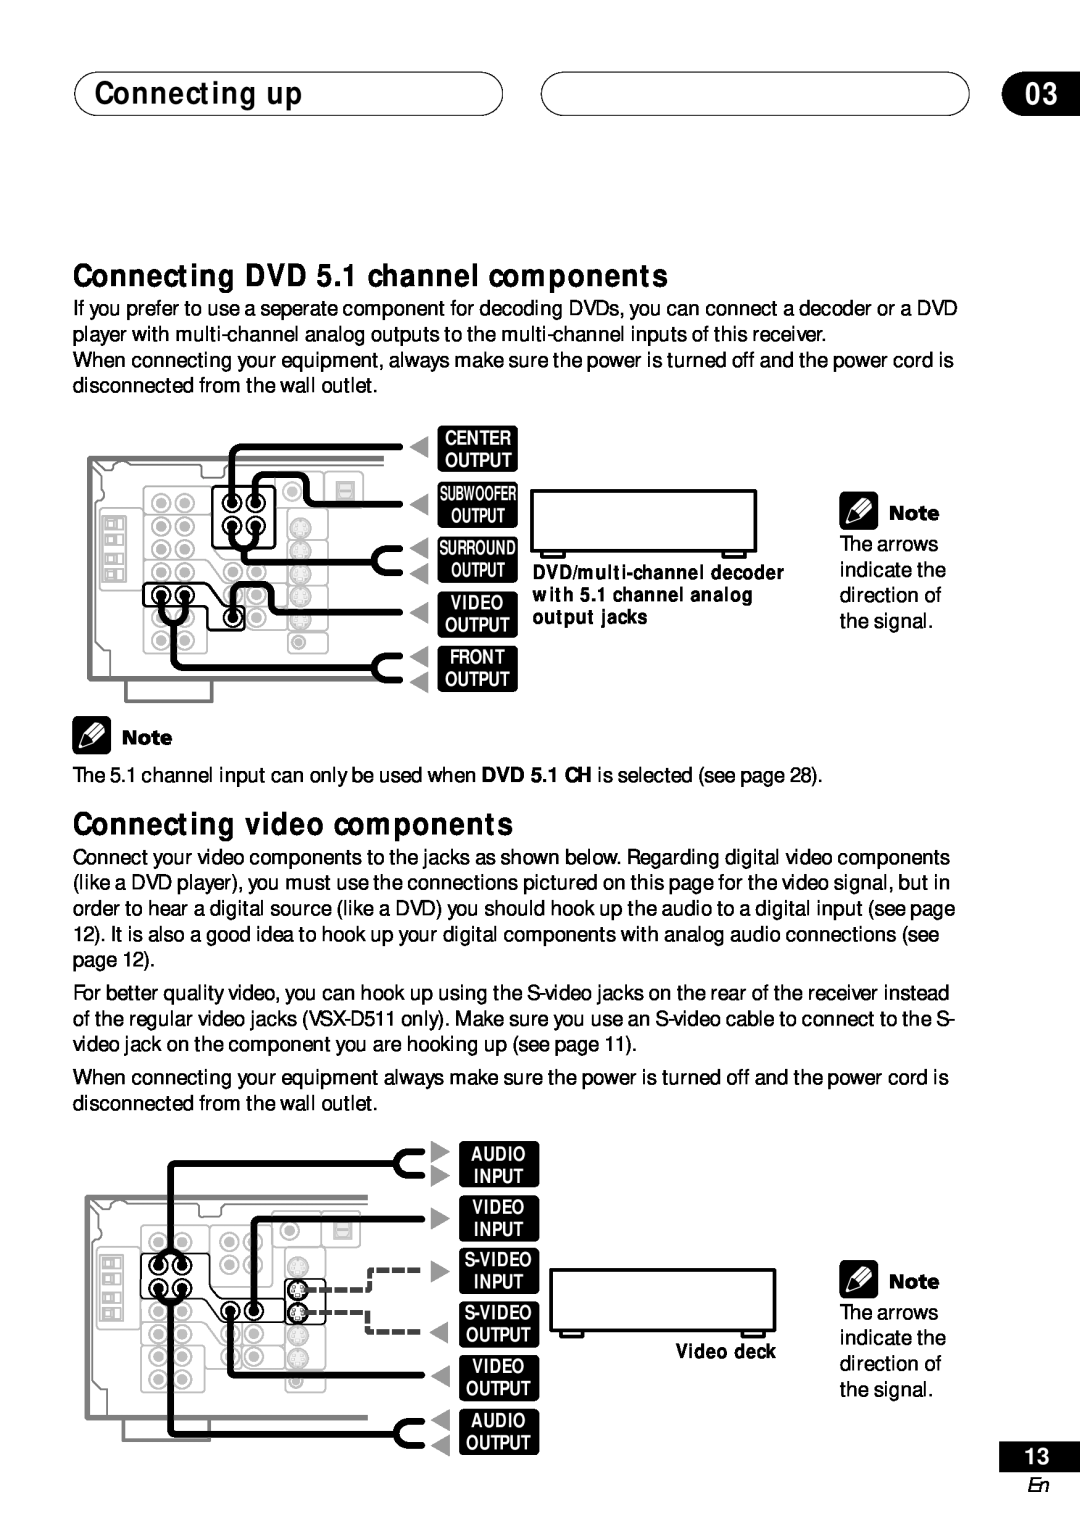 Pioneer VSX-D411 operating instructions Connecting DVD 5.1 channel components, Connecting video components, Connecting up 